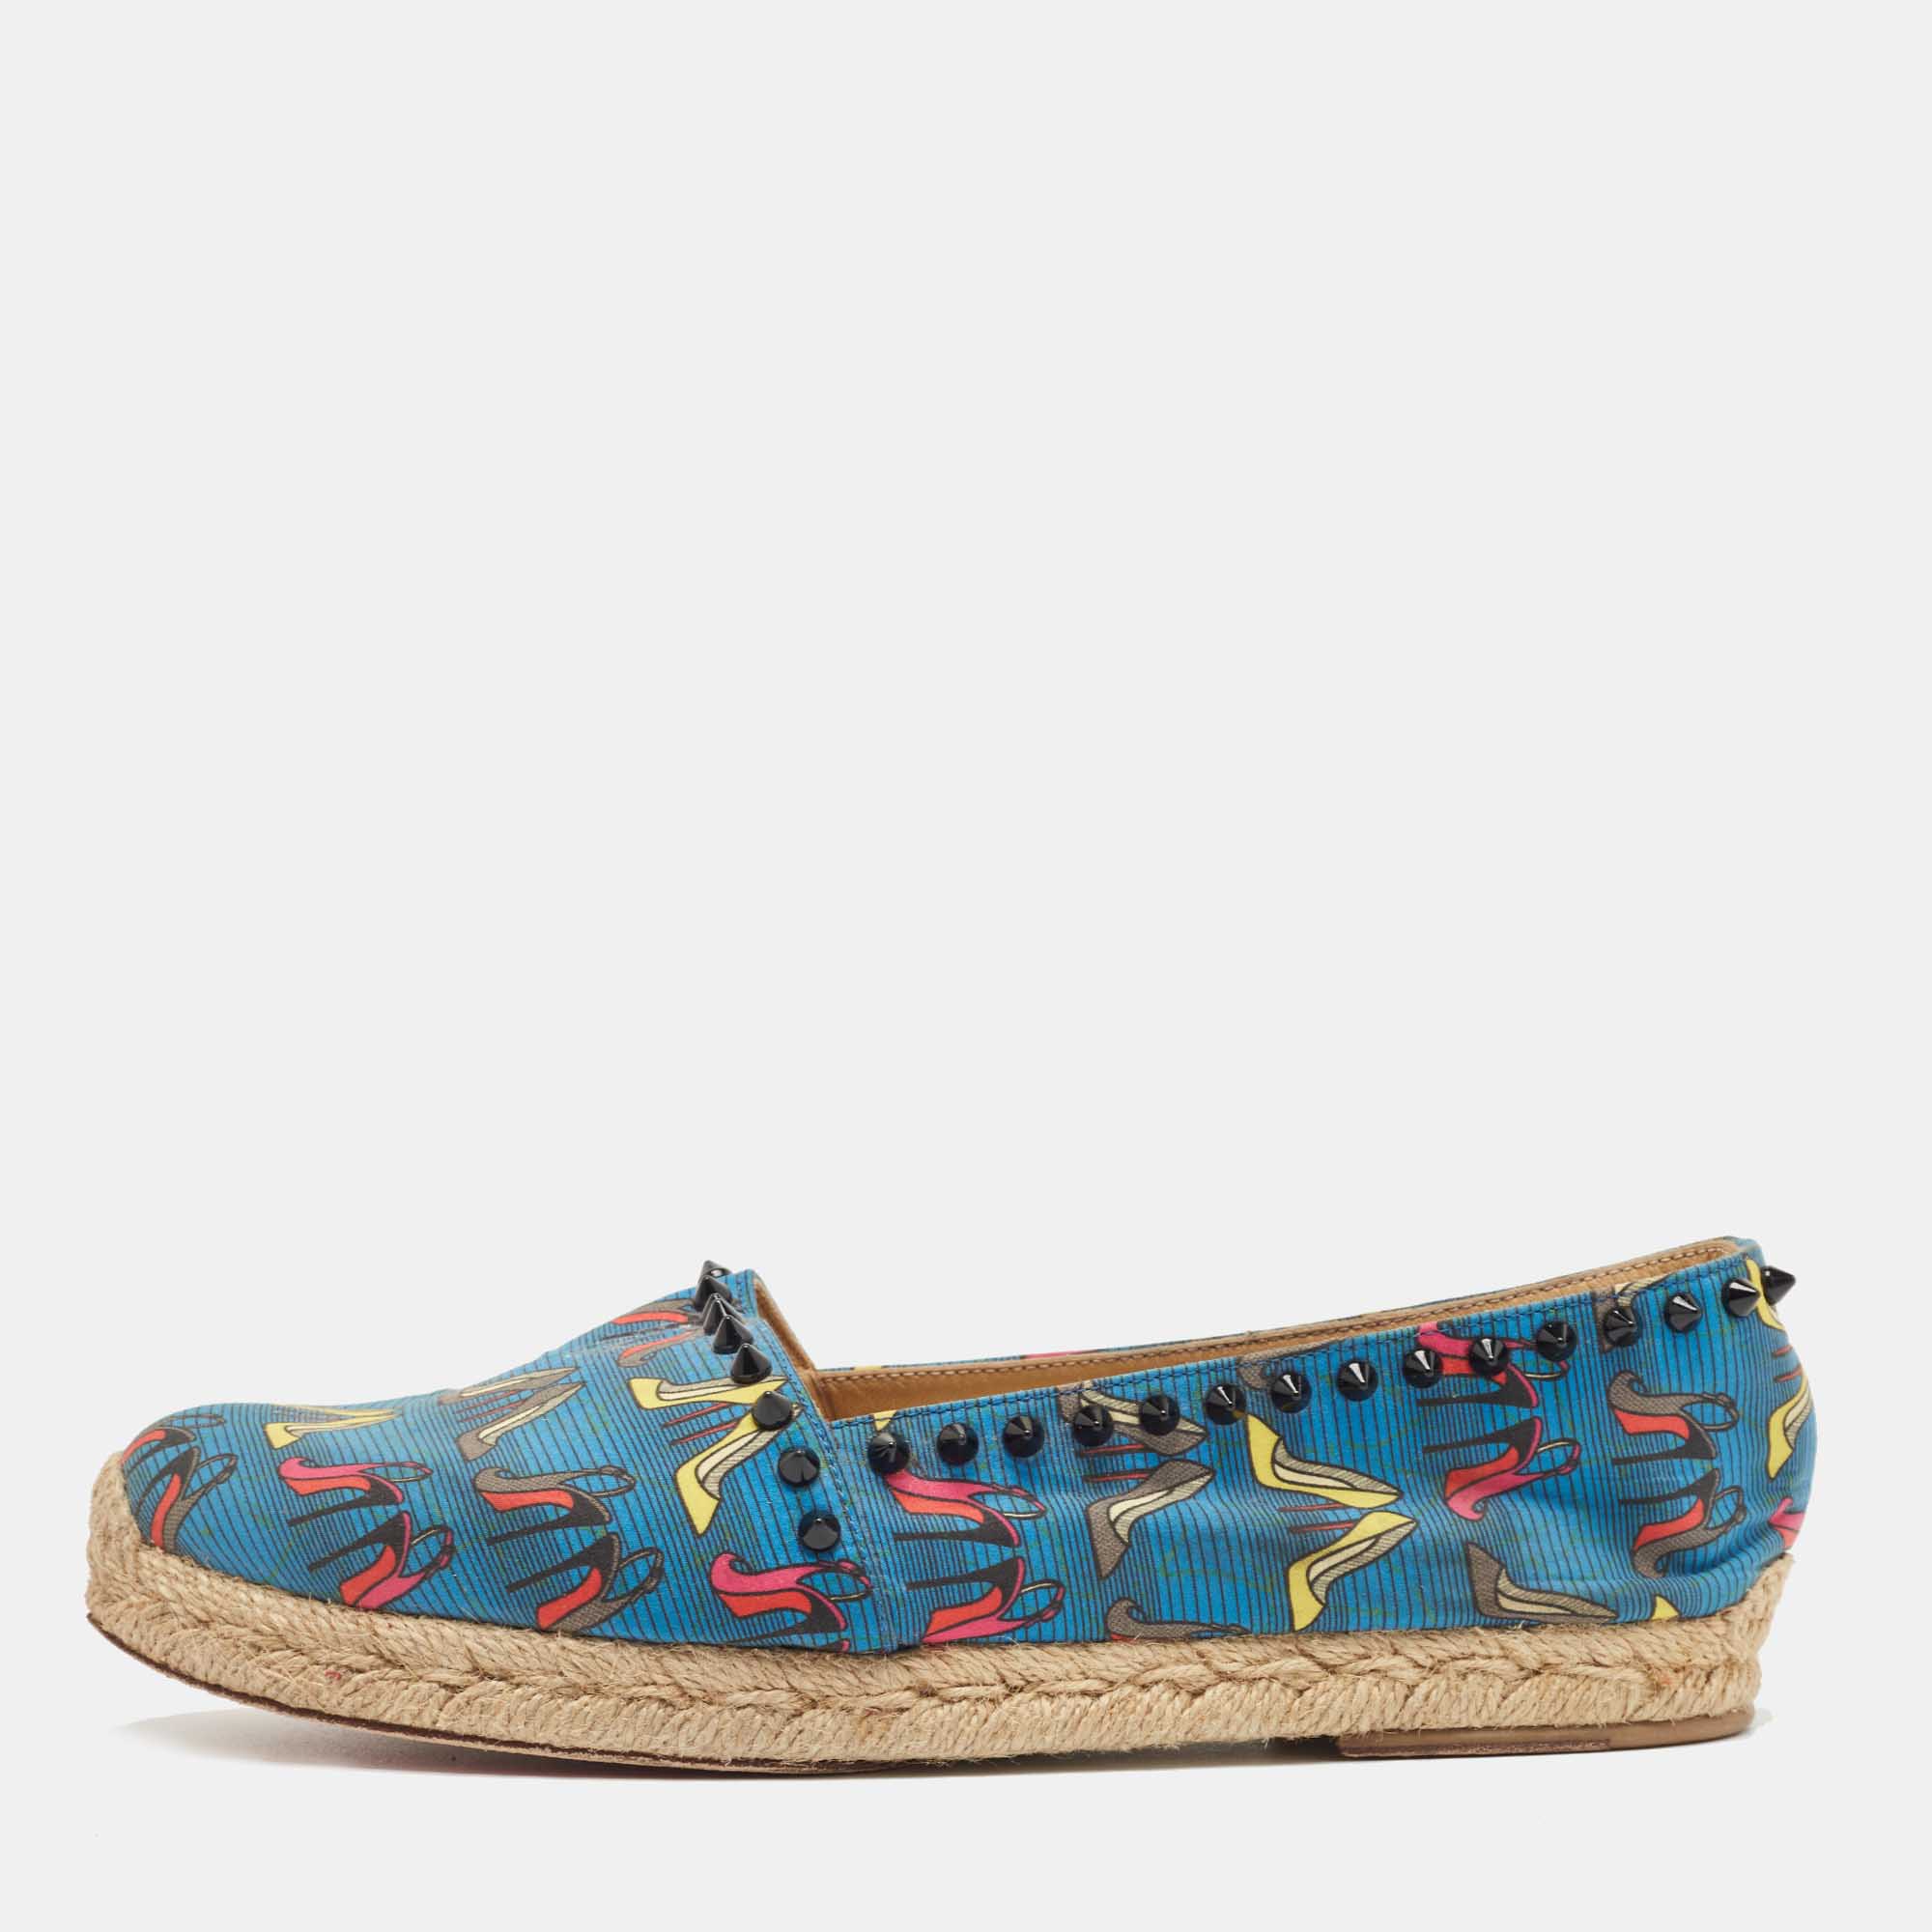 Christian louboutin blue printed canvas ares espadrille flats size 40